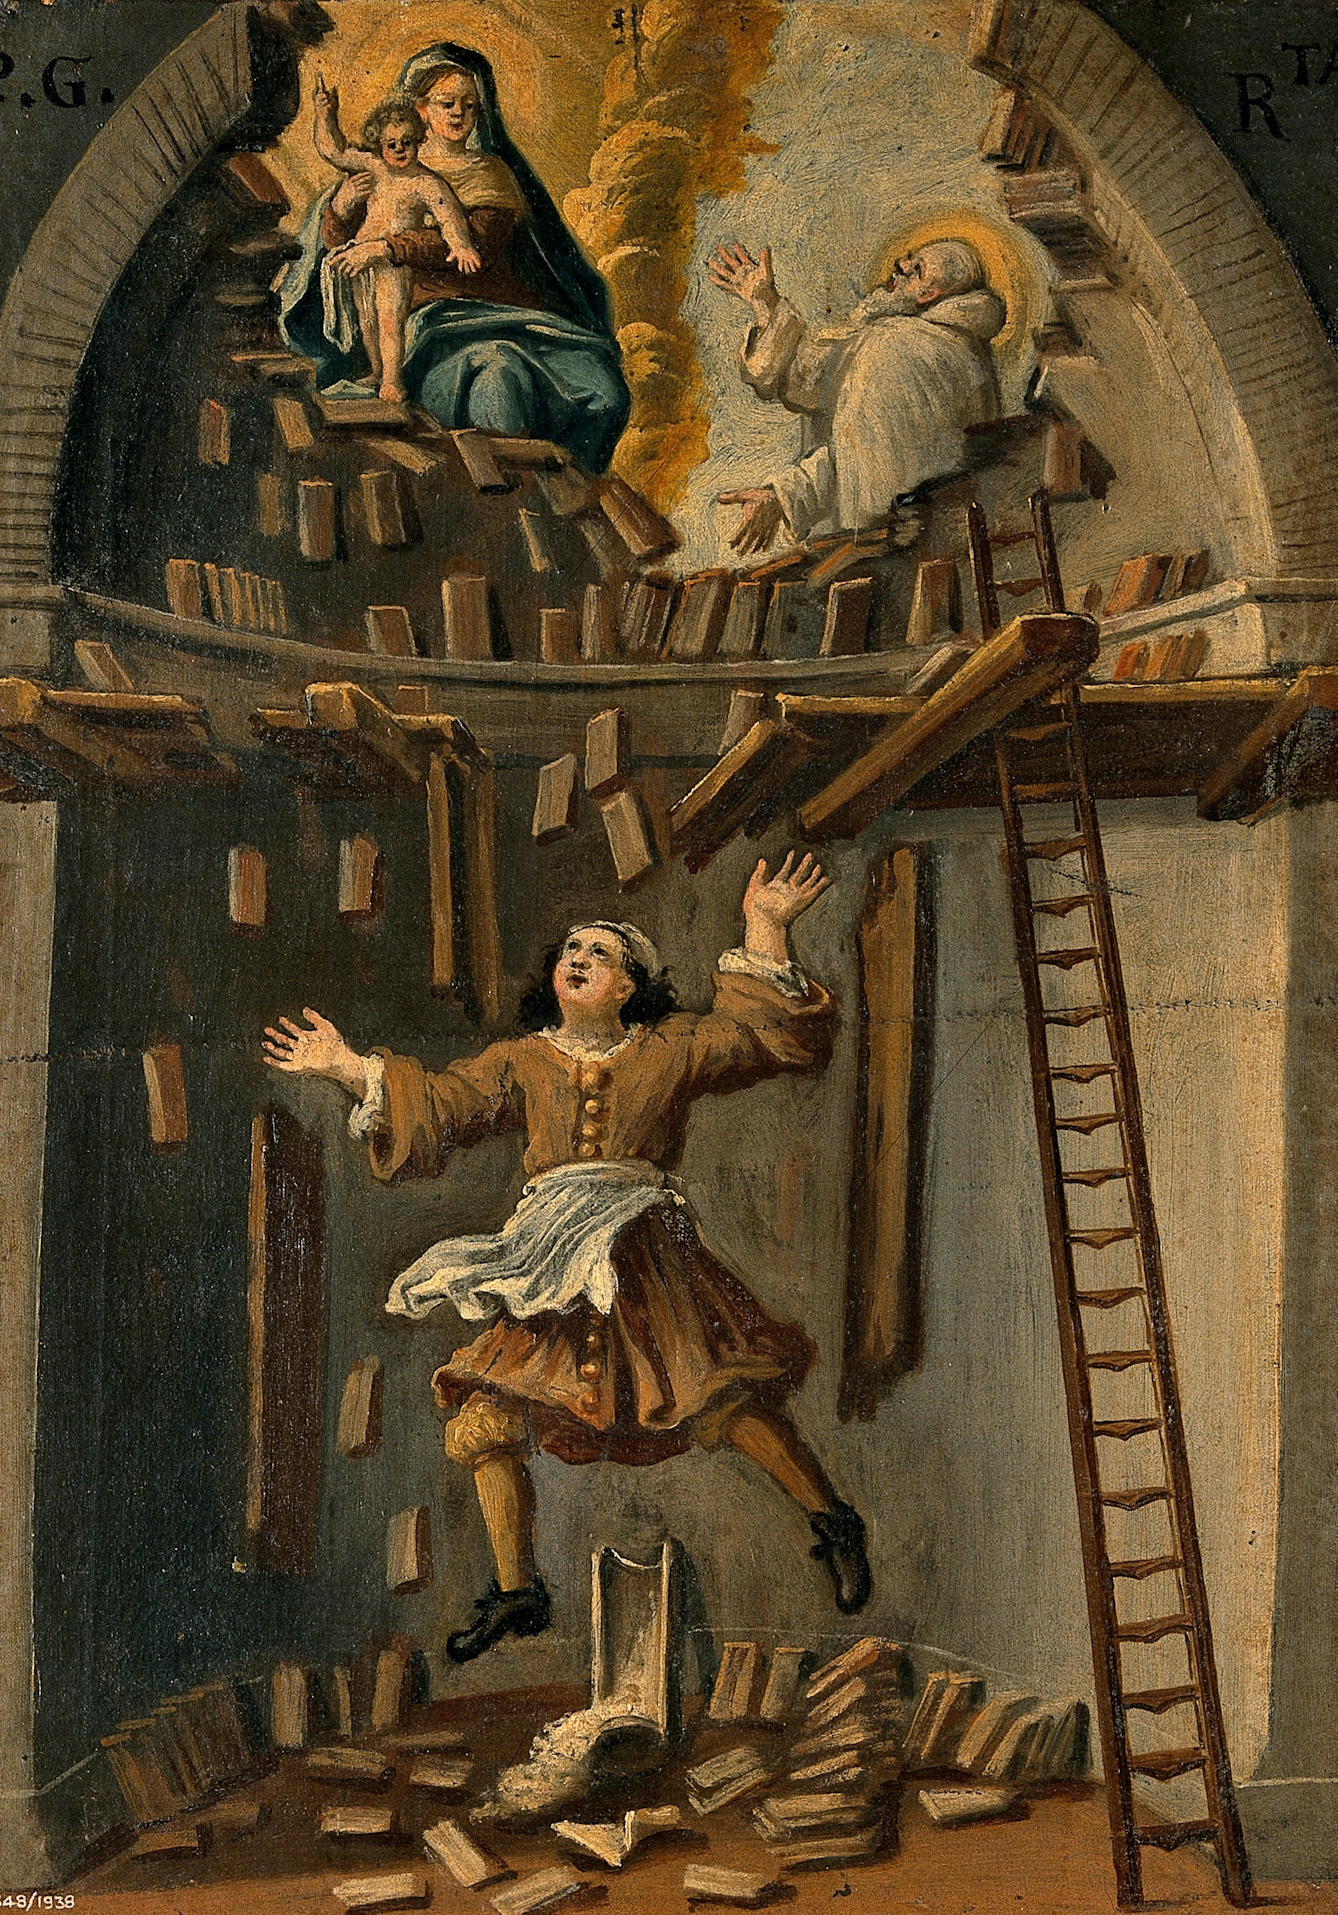 Painting of a builder falling from a platform in an apse. Above him, a saint (possibly St Bruno) begs the Virgin and Child to intervene and save the builder.